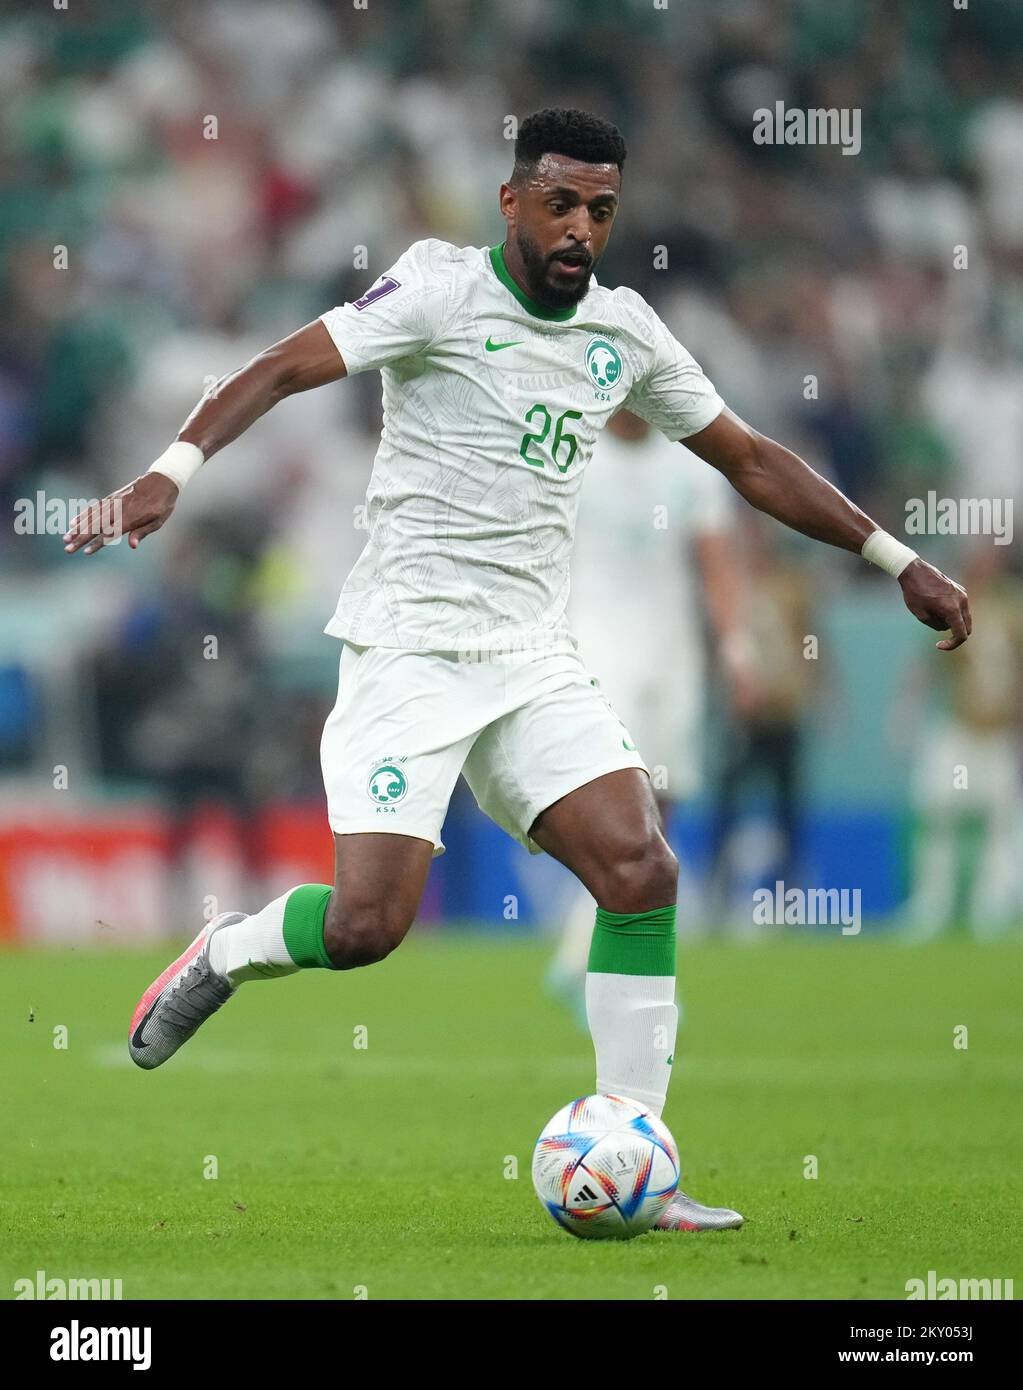 Saudi Arabia's Riyadh Sharahili during the FIFA World Cup Group C match at the Lusail Stadium in Lusail, Qatar. Picture date: Wednesday November 30, 2022. Stock Photo